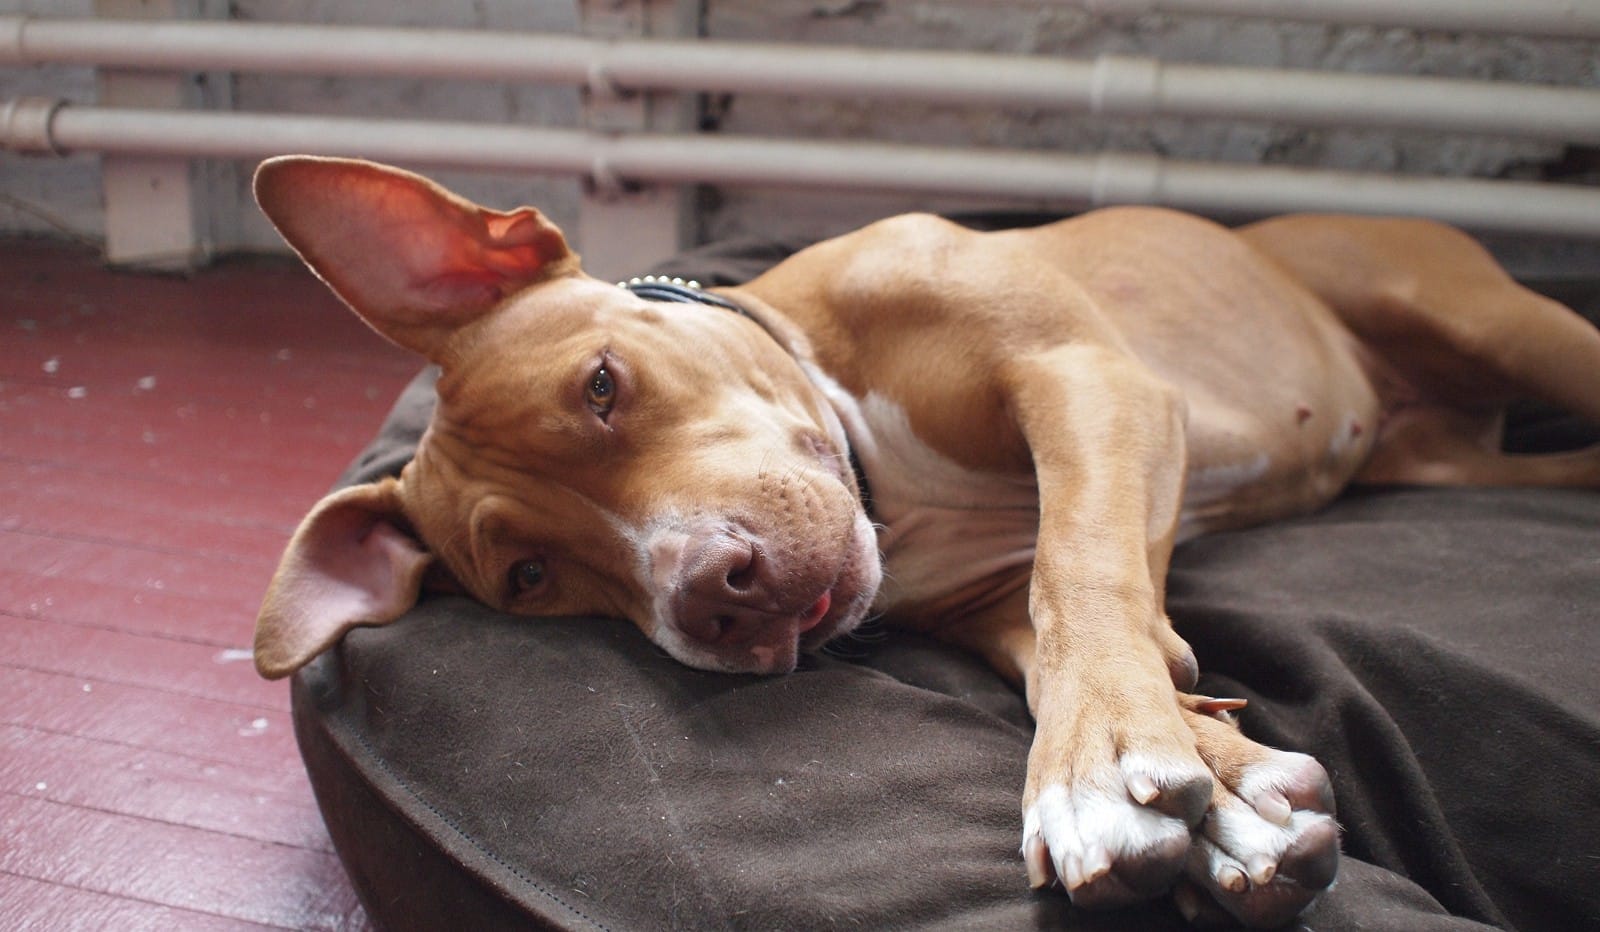 Sweet Baby Kisses Sleeping Pit Bull and Gets an Adorable Surprise!